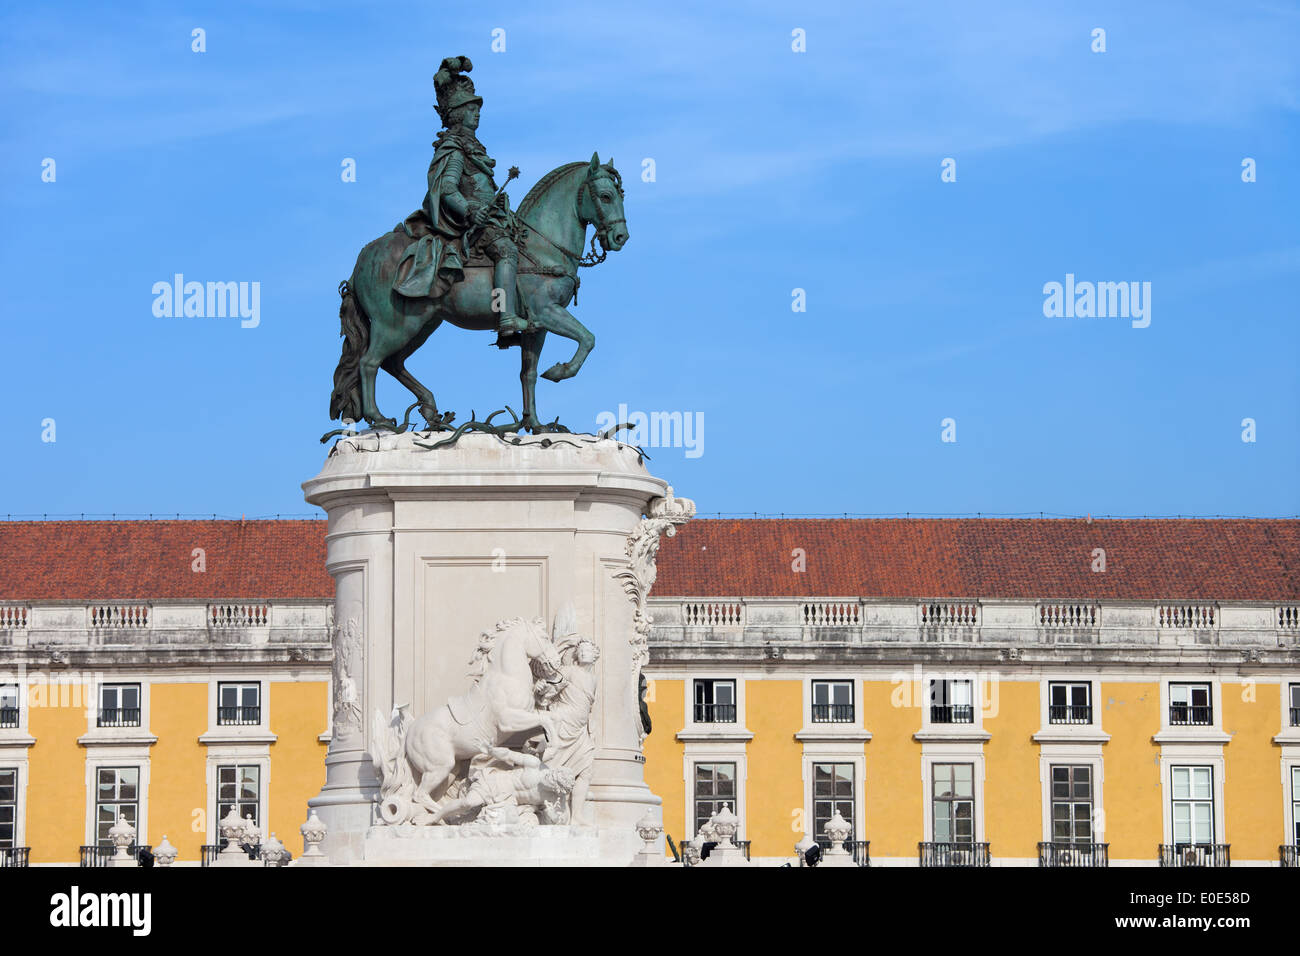 Equestrian bronze statue of King Jose I from 1775 on the Commerce Square in Lisbon, Portugal. Stock Photo